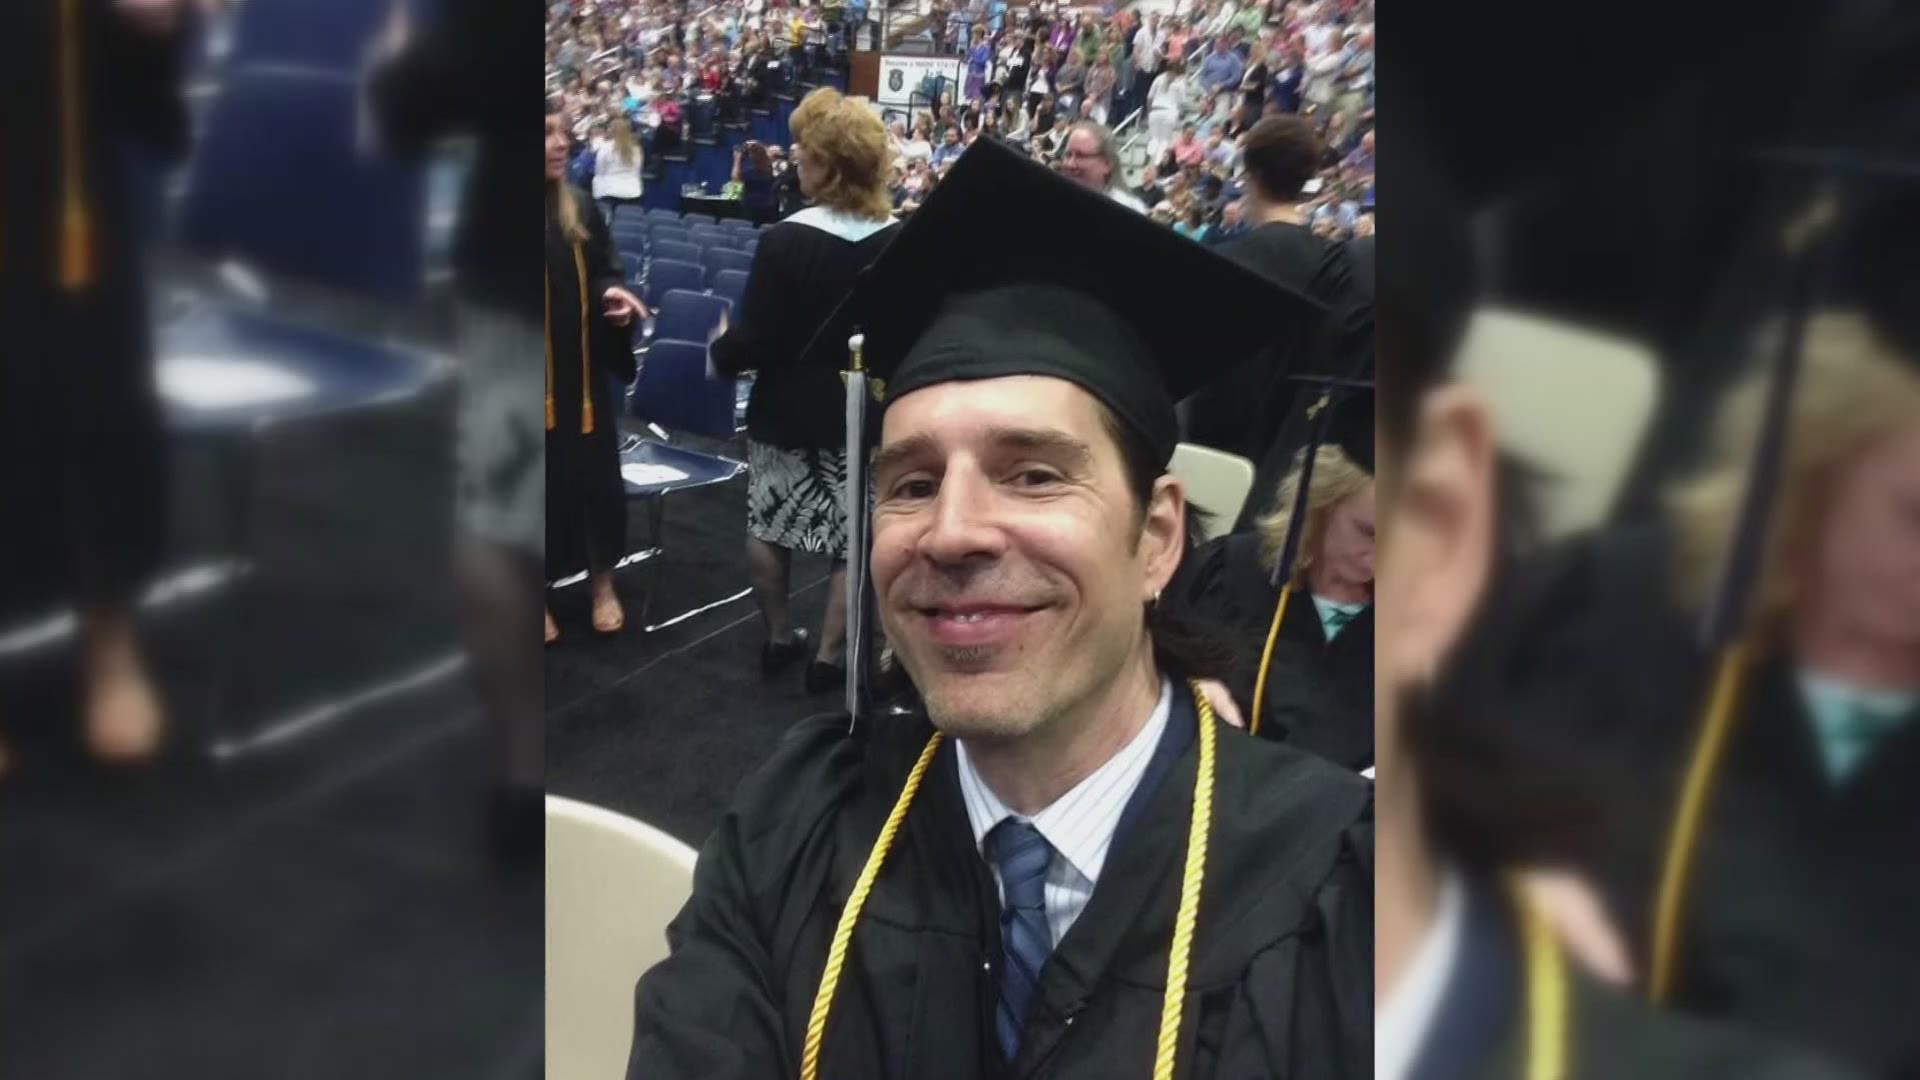 From a mug shot to a master's degree, Portland man shares recovery story